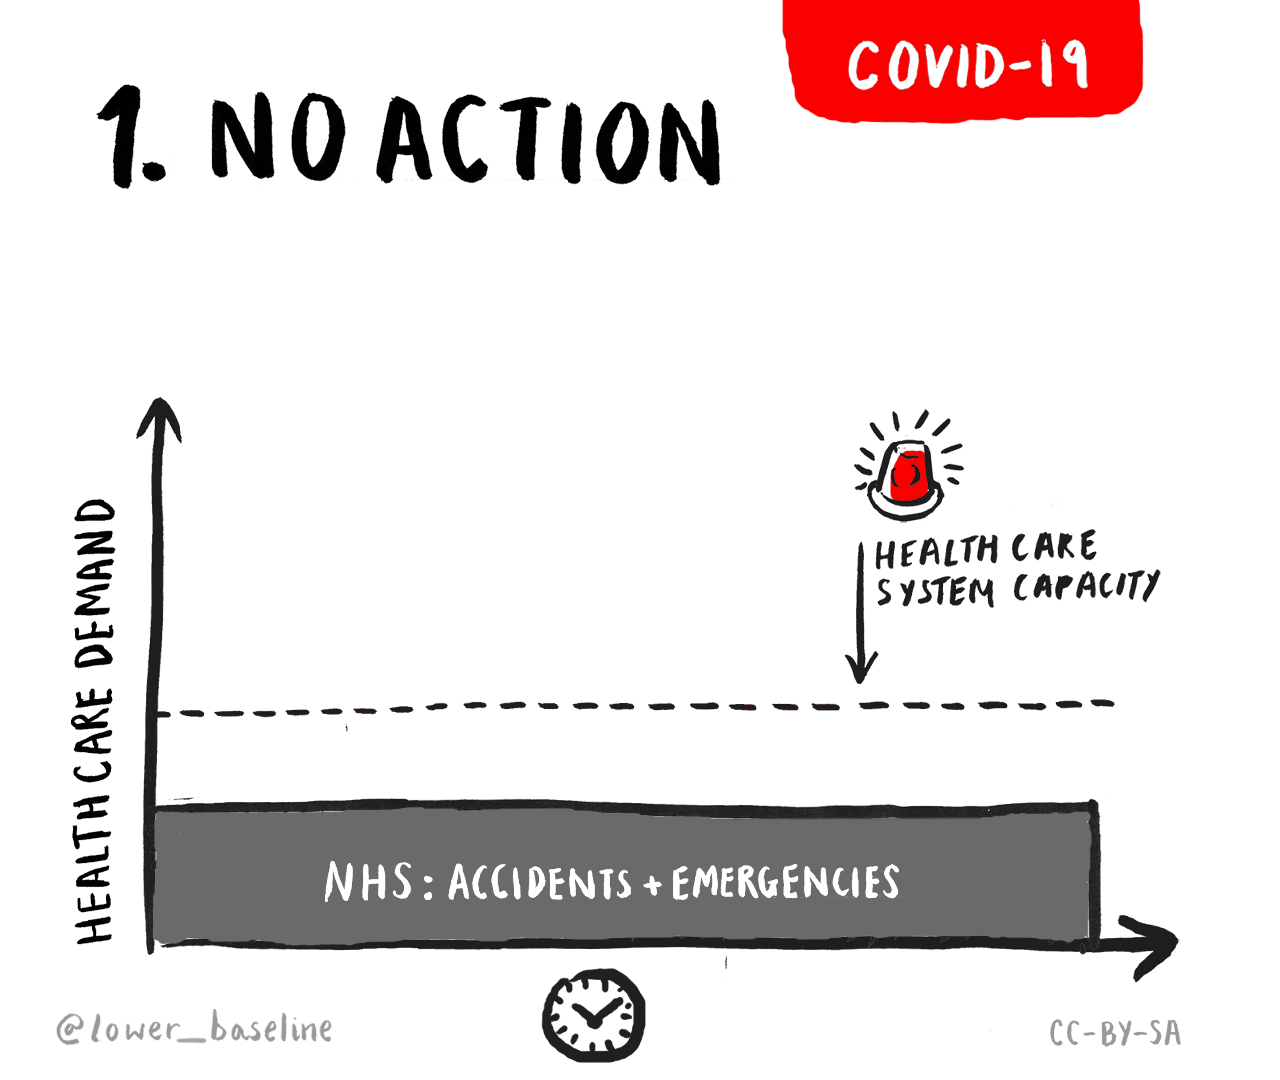 Lower the baseline demands of the NHS - Animation